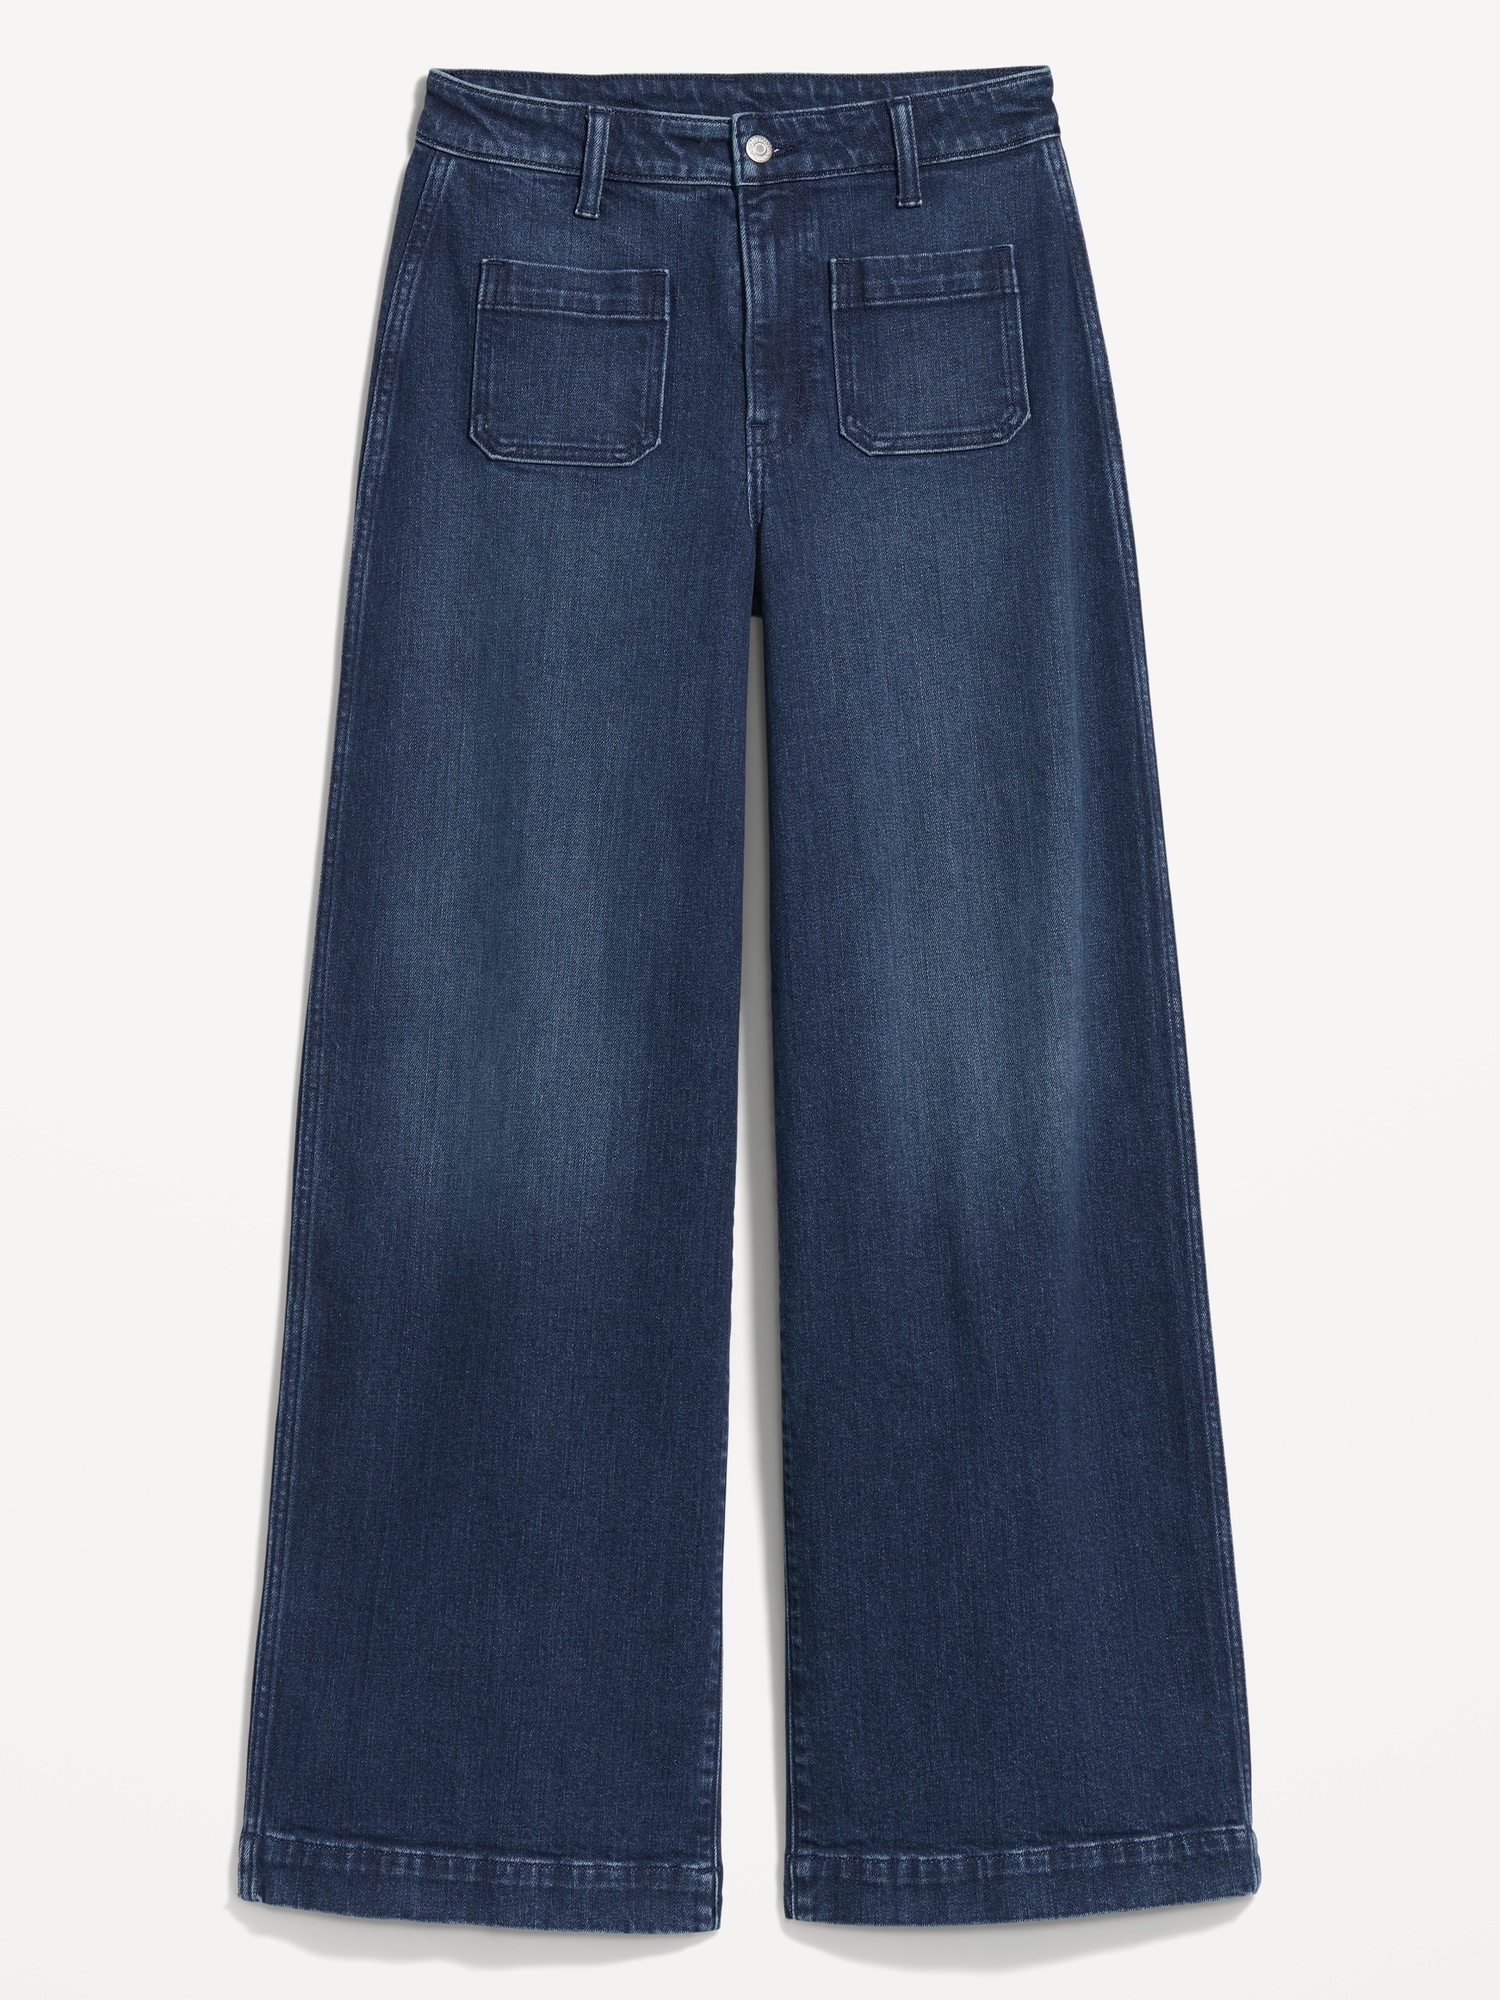 Old Navy Womens Jeans in Womens Clothing 